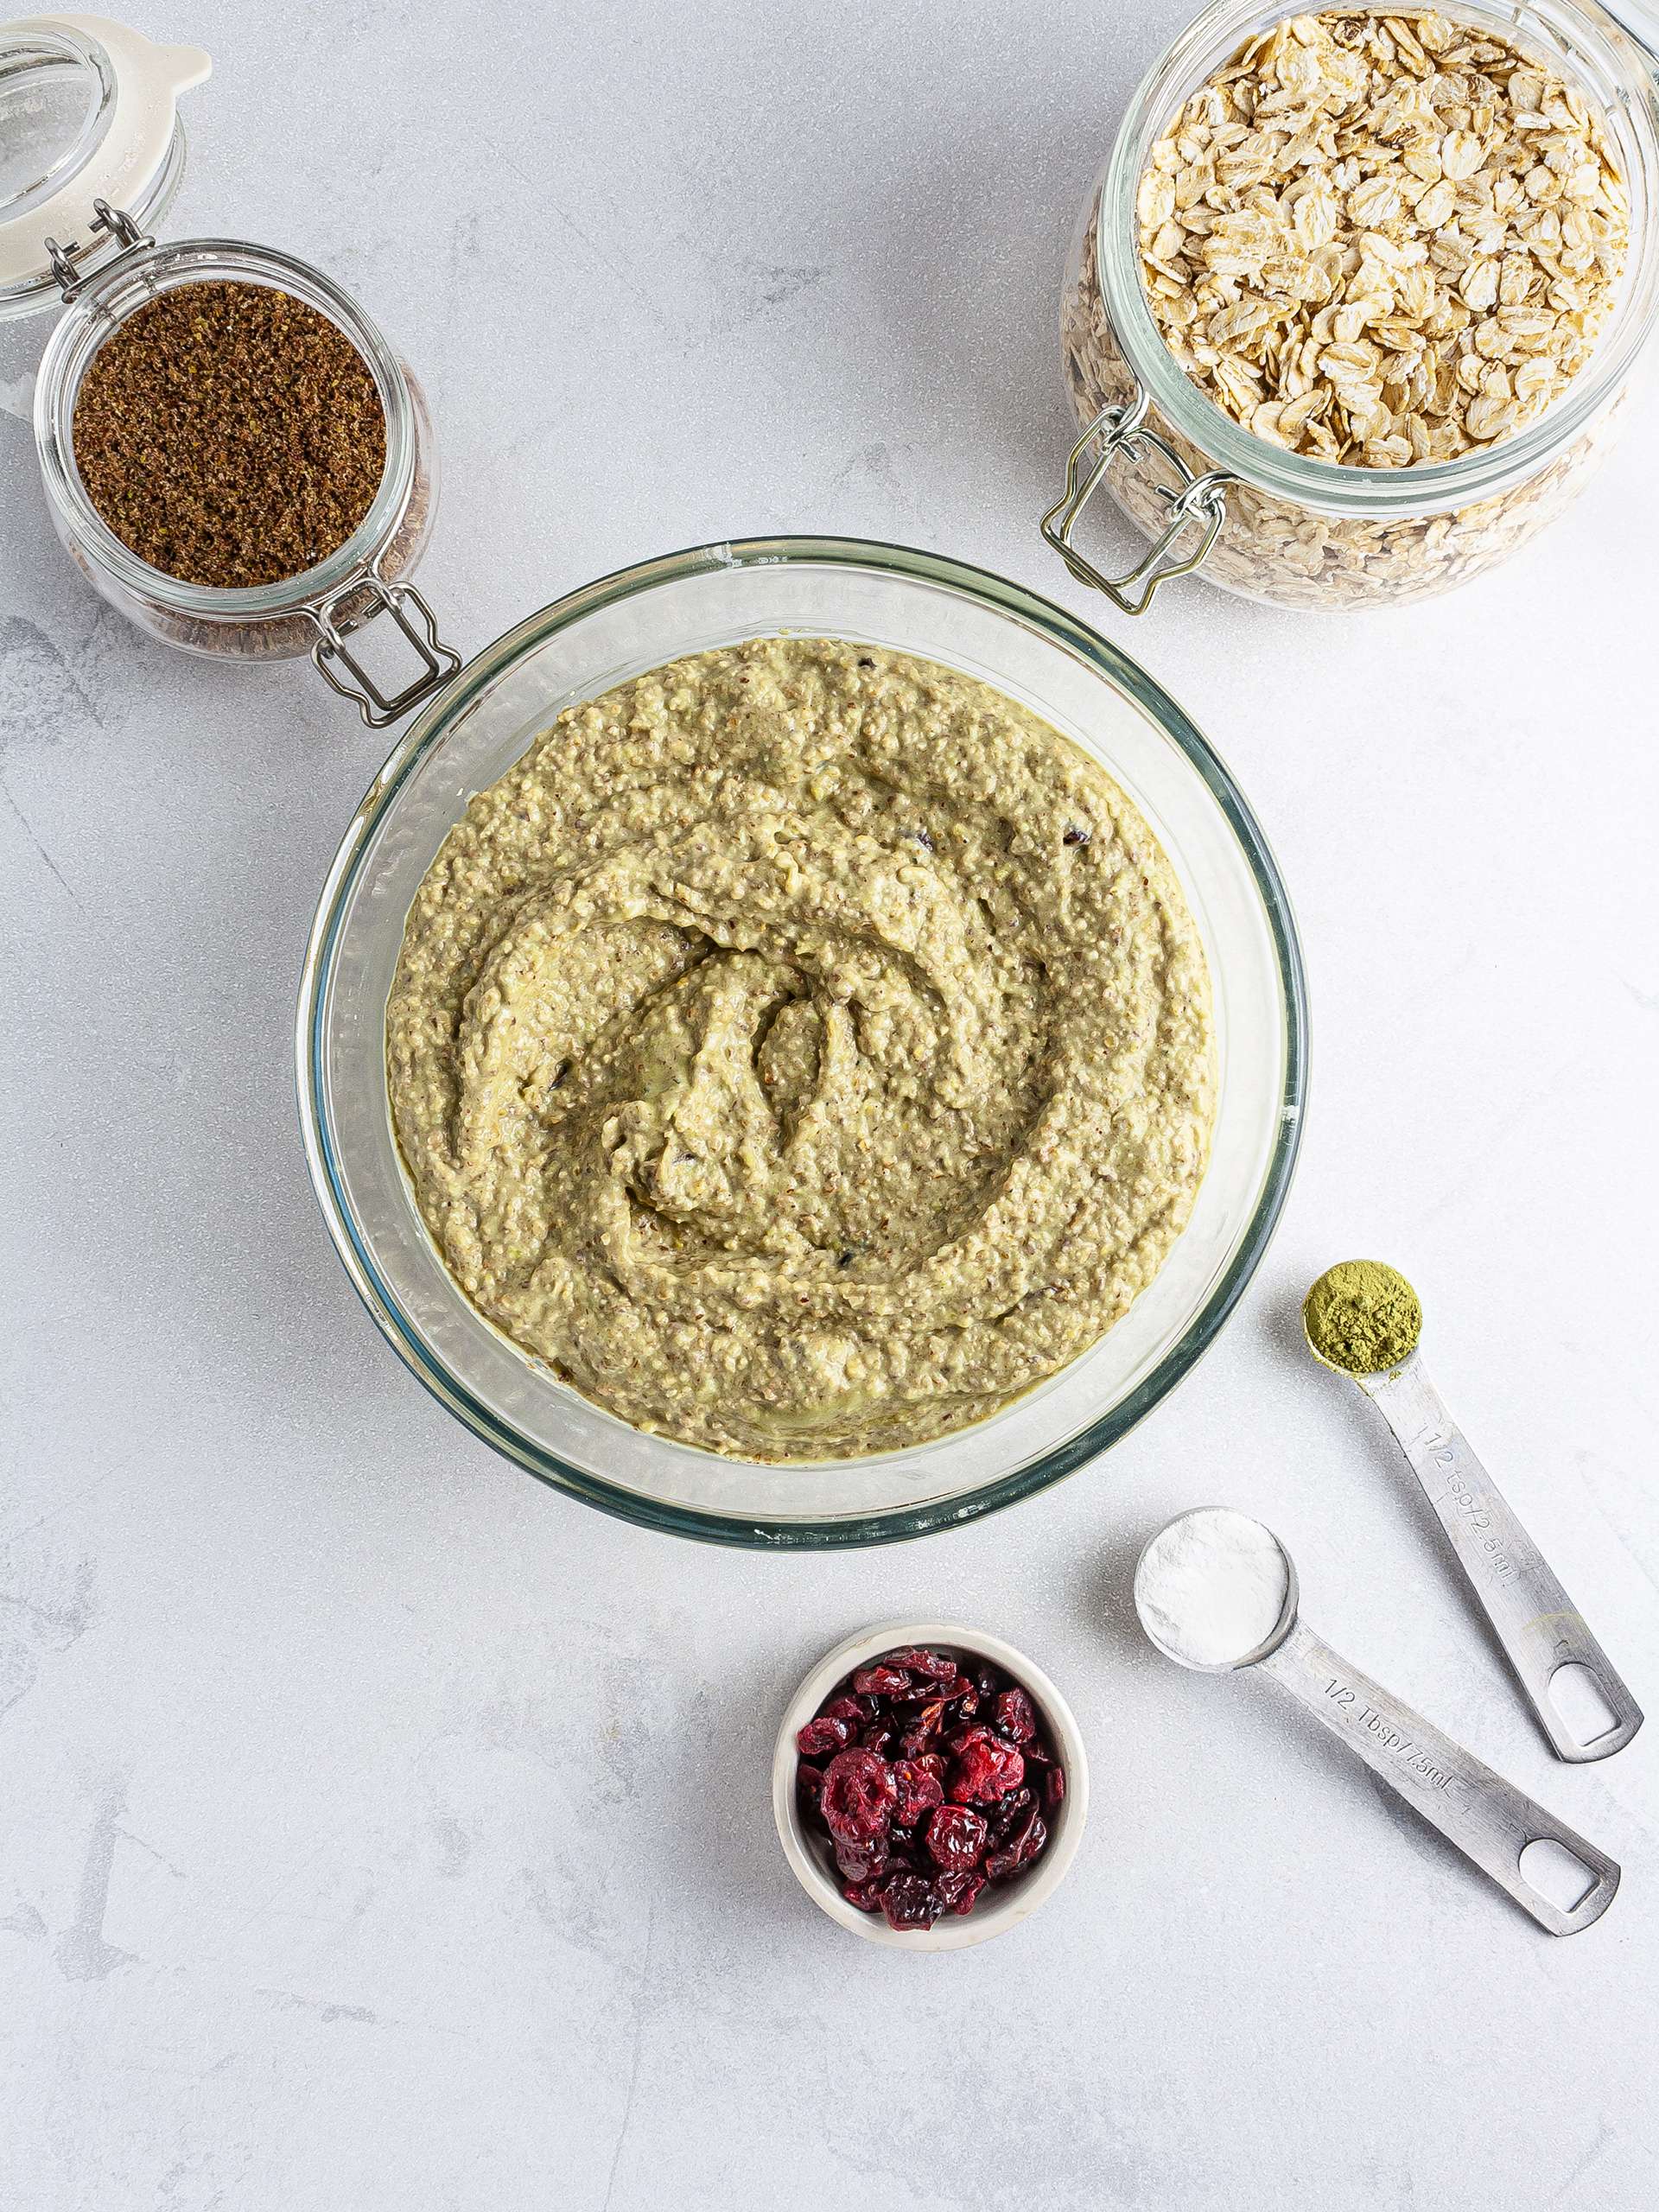 Muffin batter with oats, flaxseeds, cranberries and matcha powder